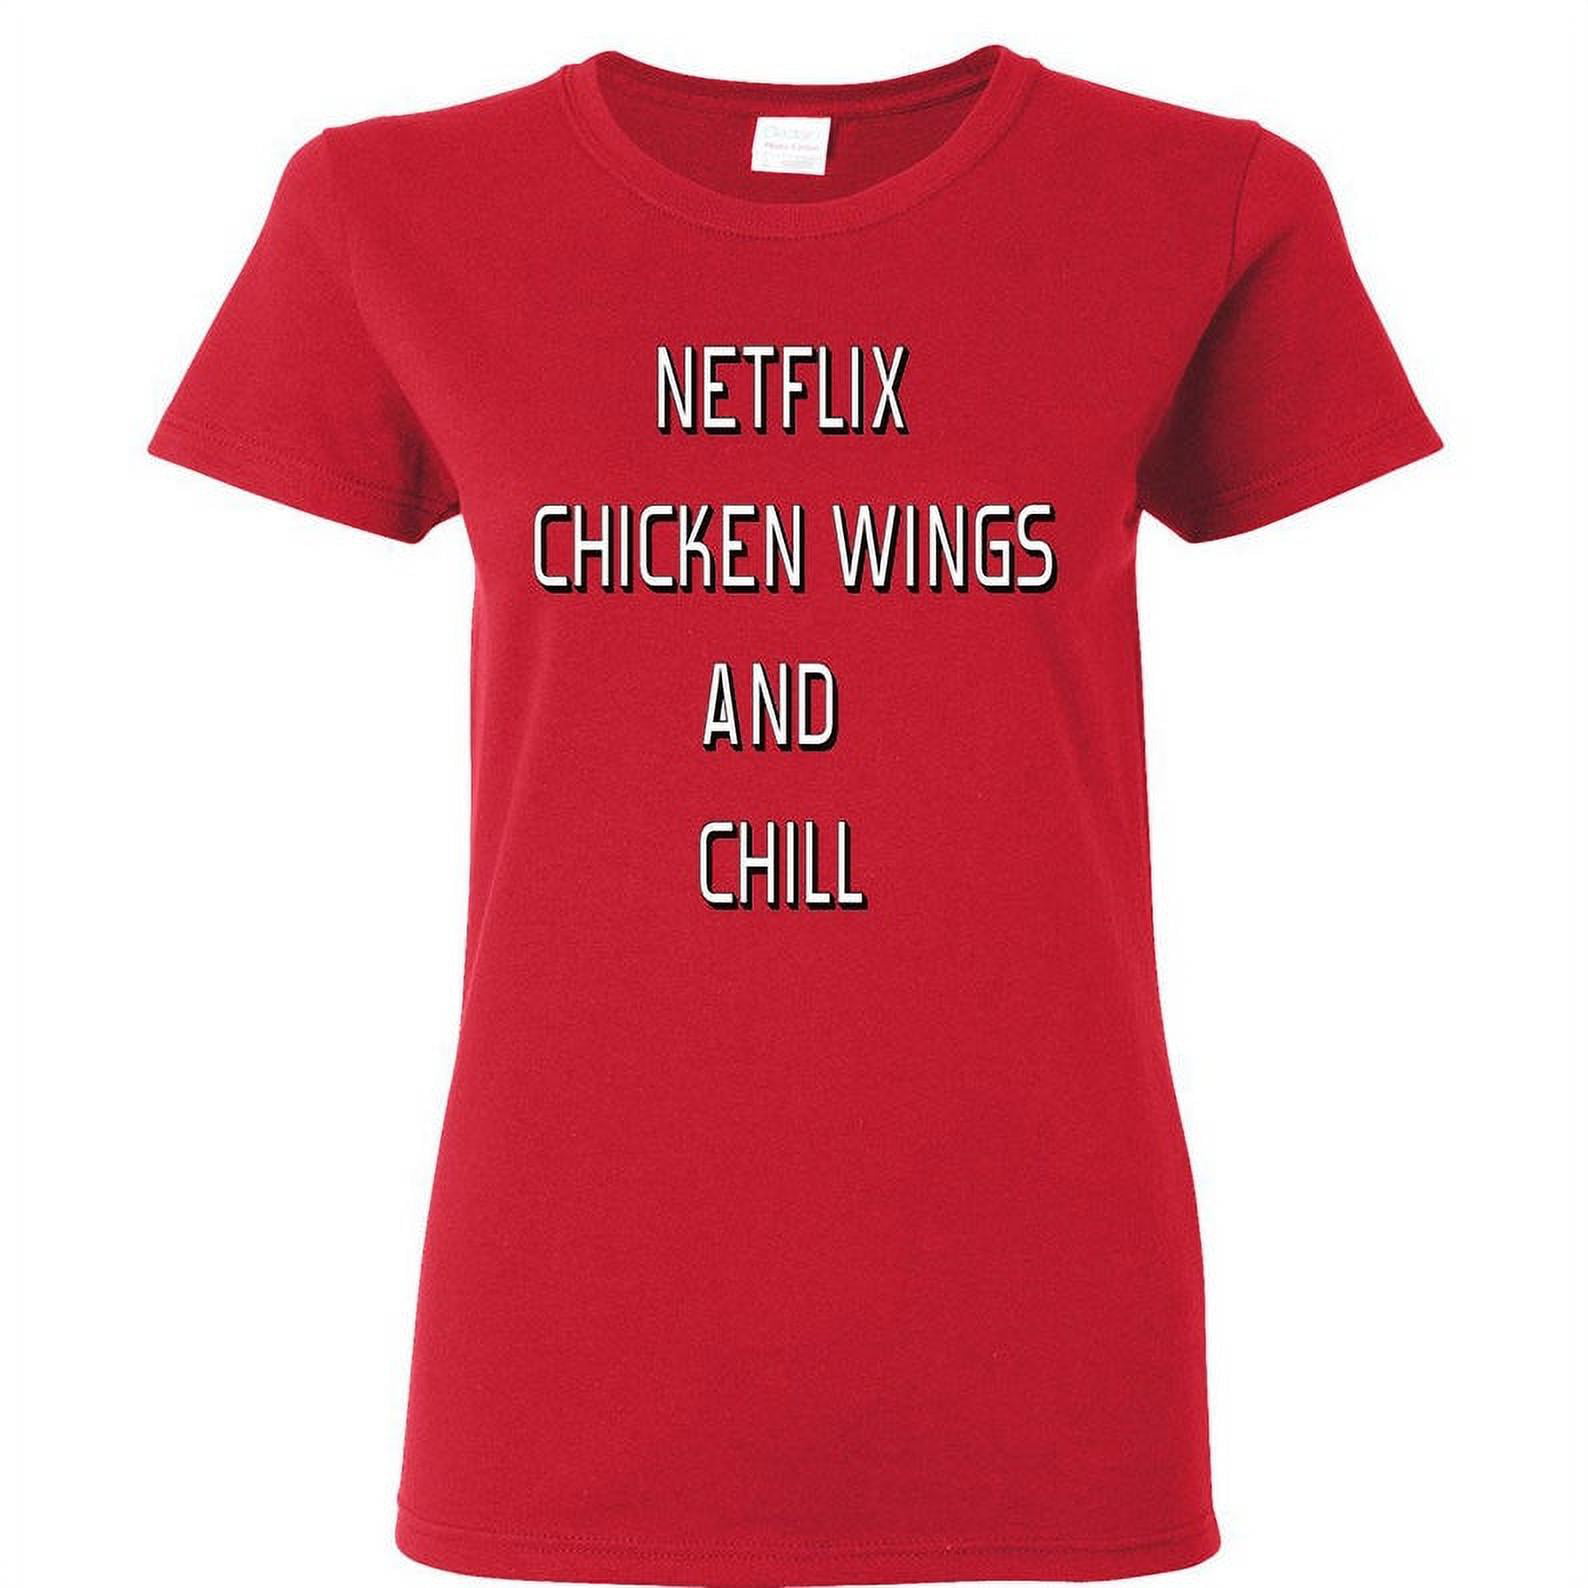 Netflix Chicken Wings And Chill Lady T-shirt Funny Party Women Tee Outfit  Color Red Large 